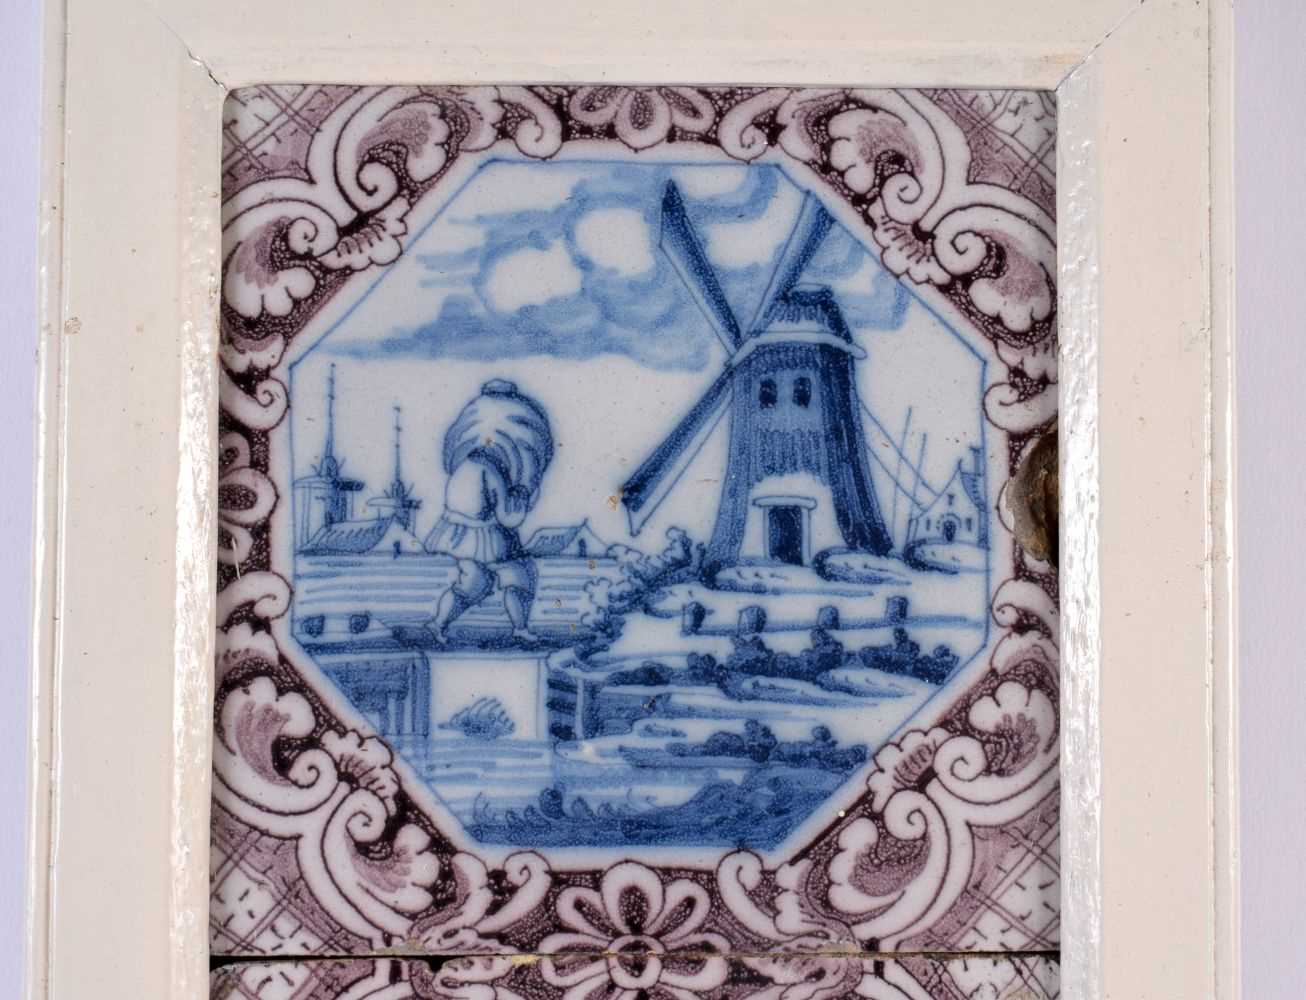 A SET OF THREE 18TH CENTURY DUTCH DELFT MANGANESE BLUE AND WHITE TILES. 42 cm x 15 cm. - Image 2 of 5